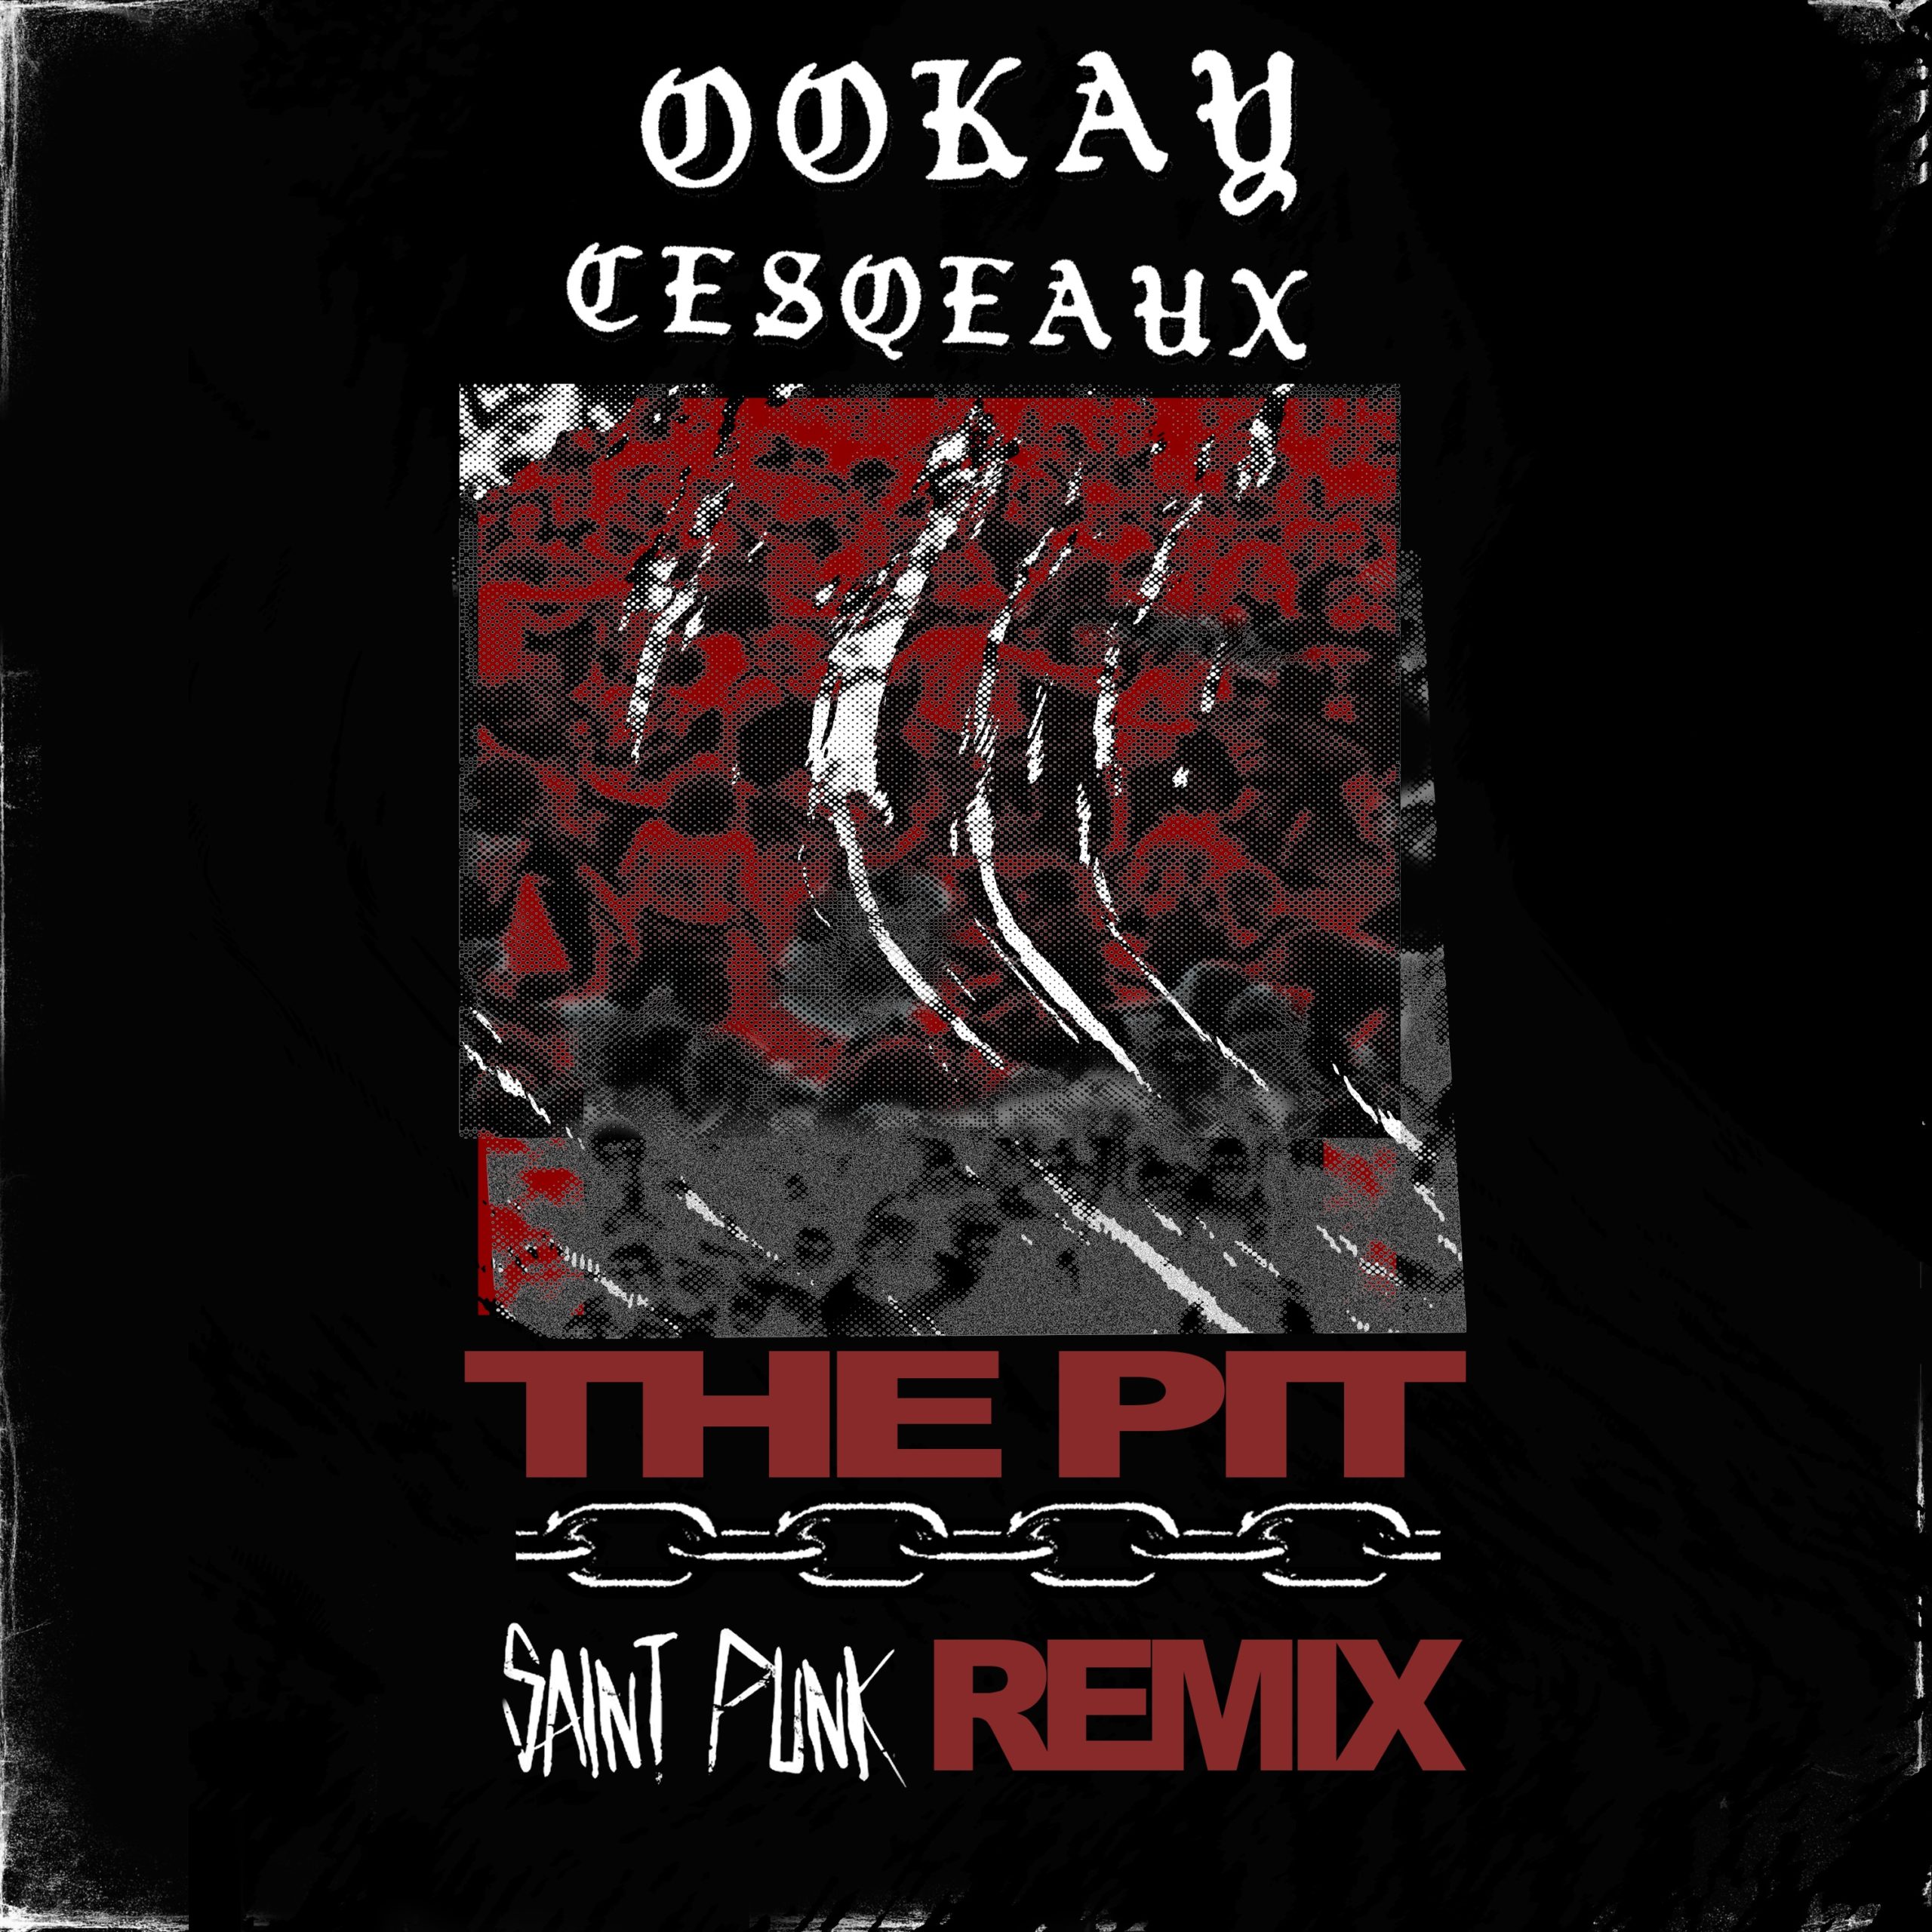 Saint Punk Goes Hard With His Remix of Ookay & Cesqeaux’s “The Pit”